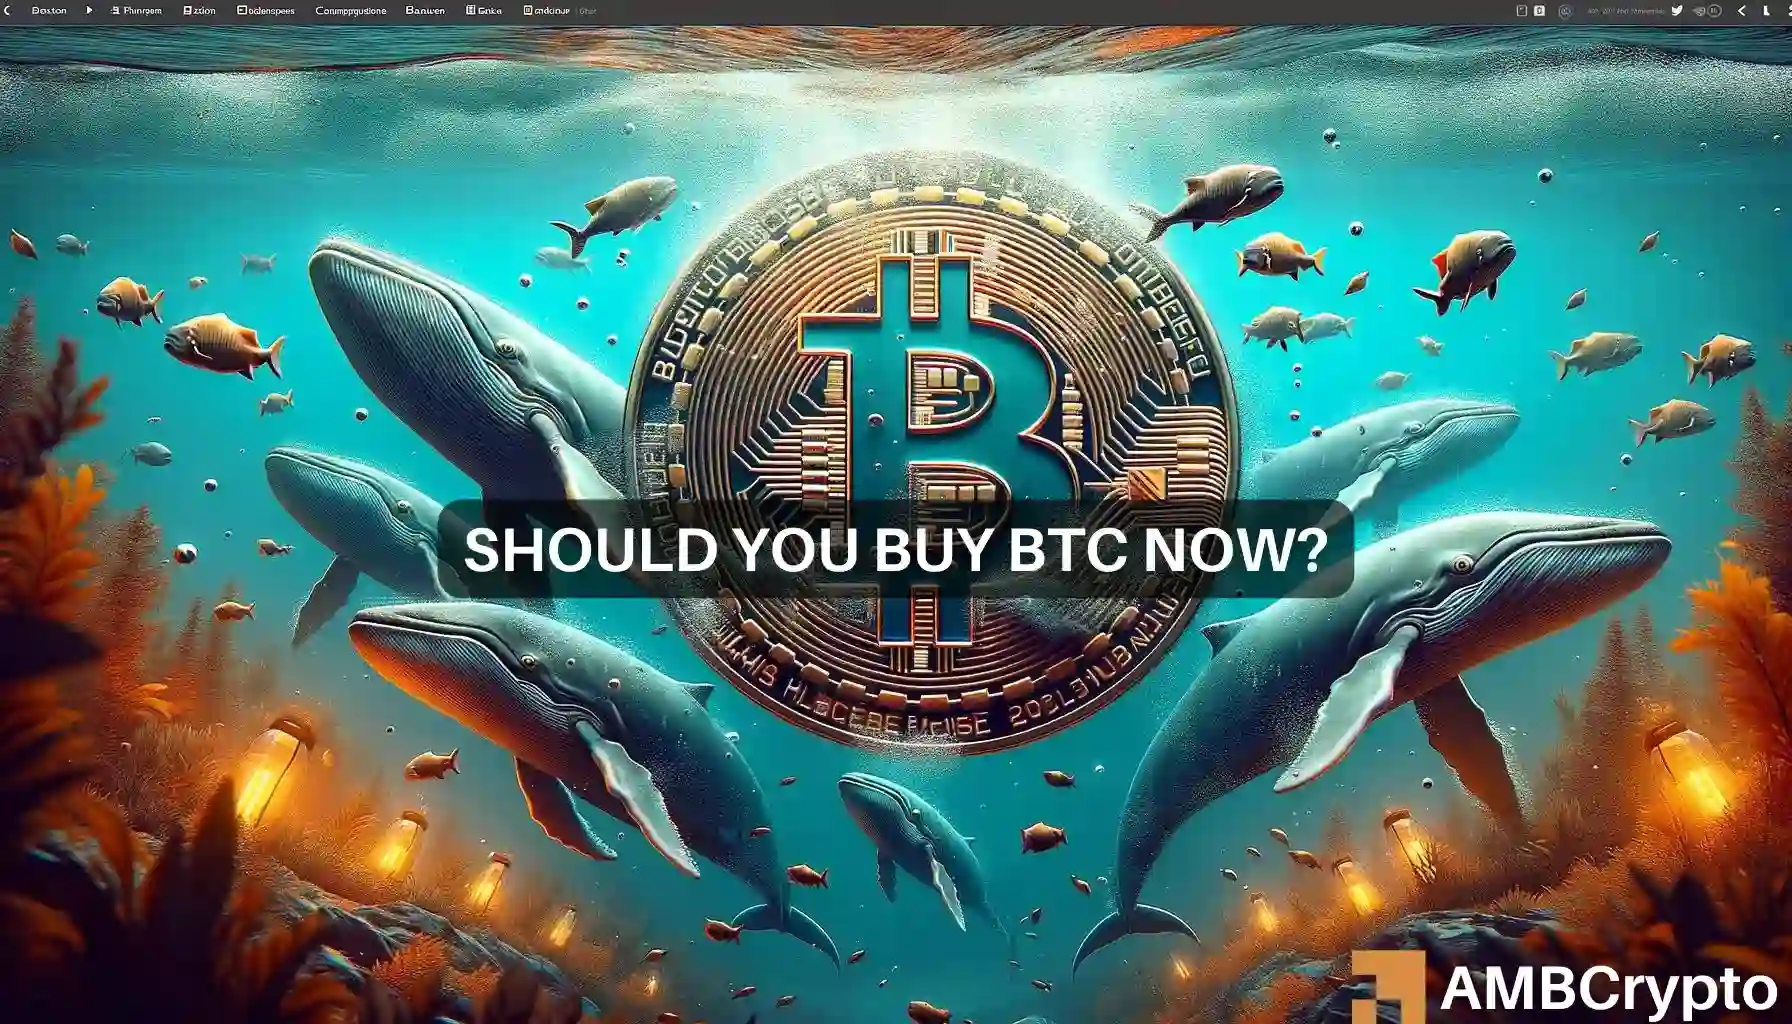 Bitcoin whales are accumulating